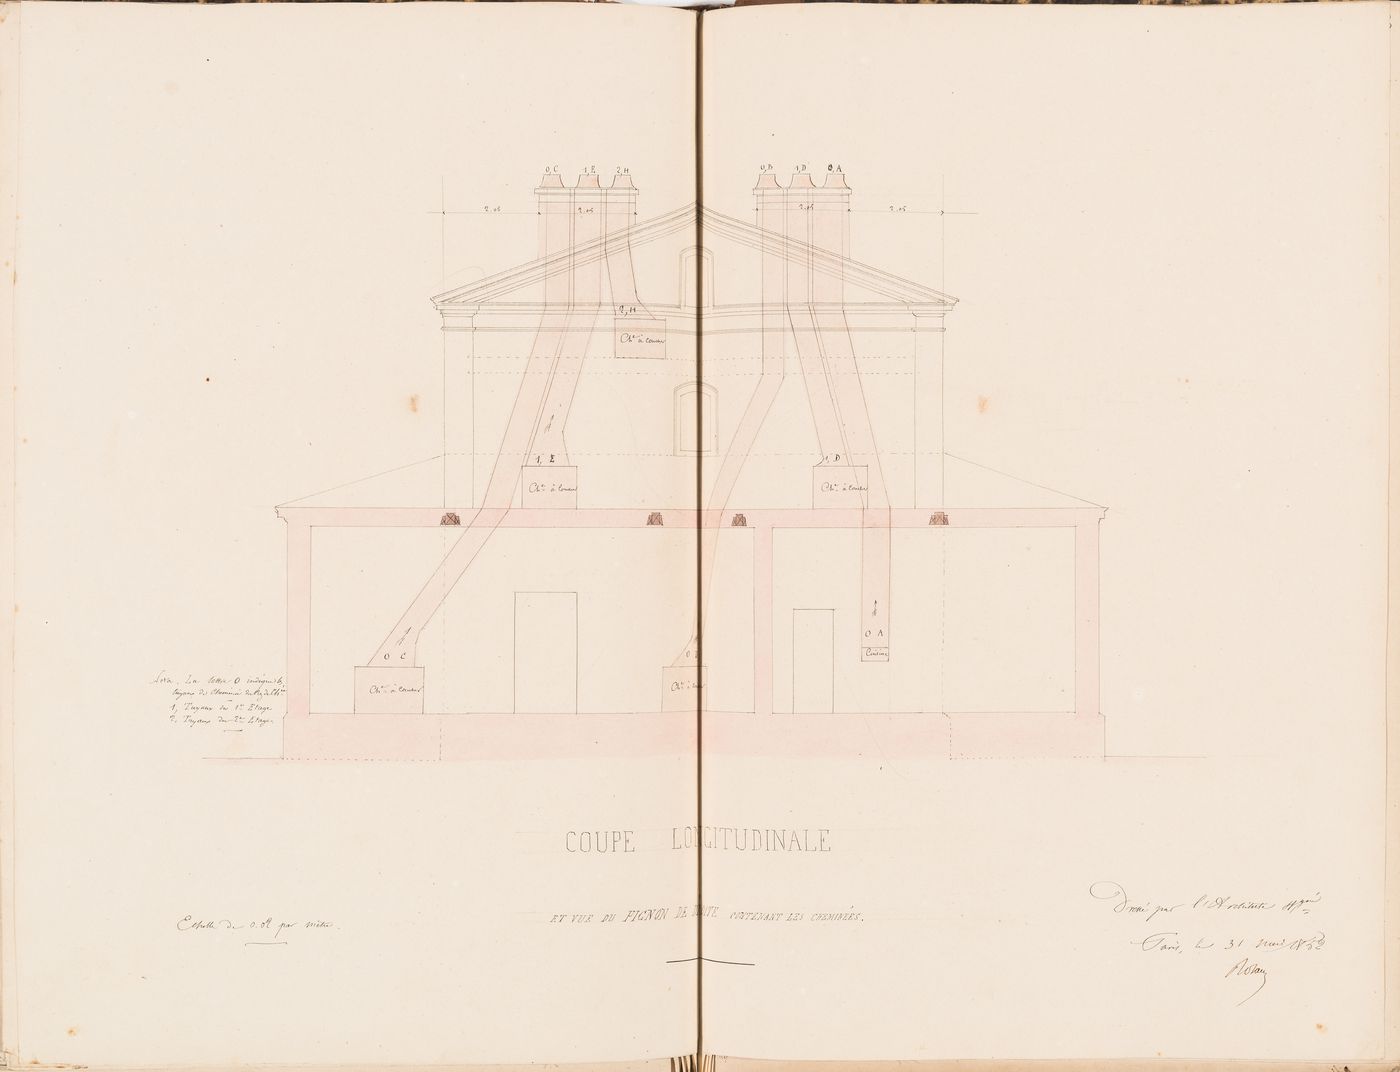 Cross section through the right gable showing the placement of the chimneys and flues for a country house for Madame de Lescure, Royan